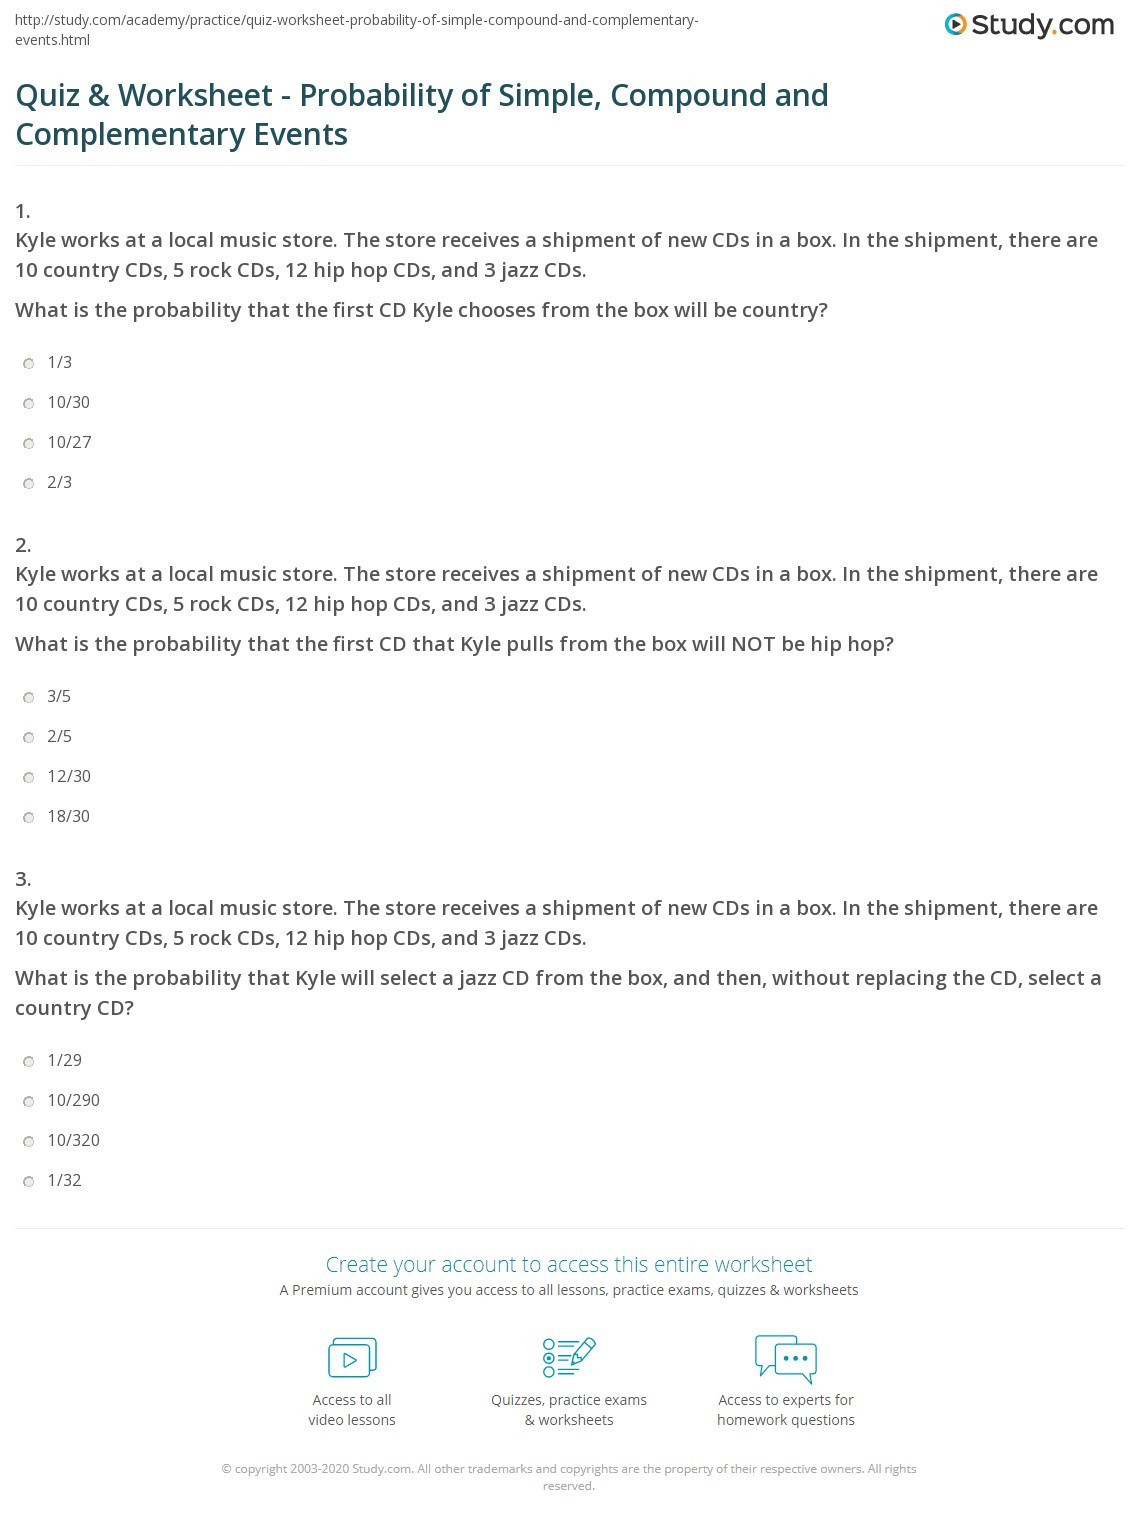 Probability Worksheet High School Quiz &amp; Worksheet Probability Of Simple Pound and